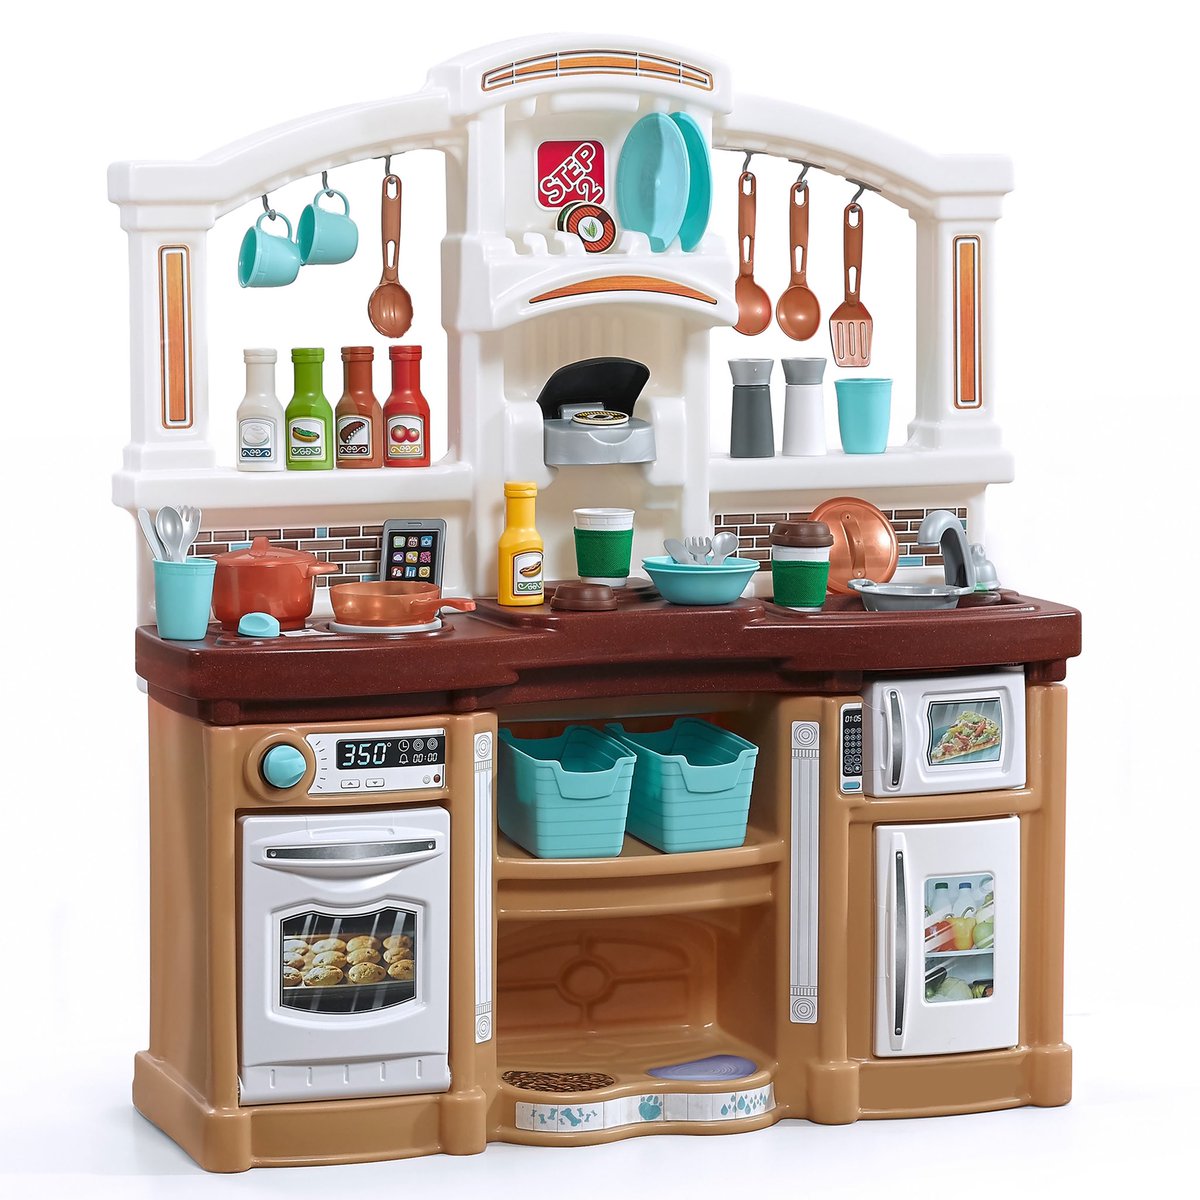 A play kitchen for a future grill dad.